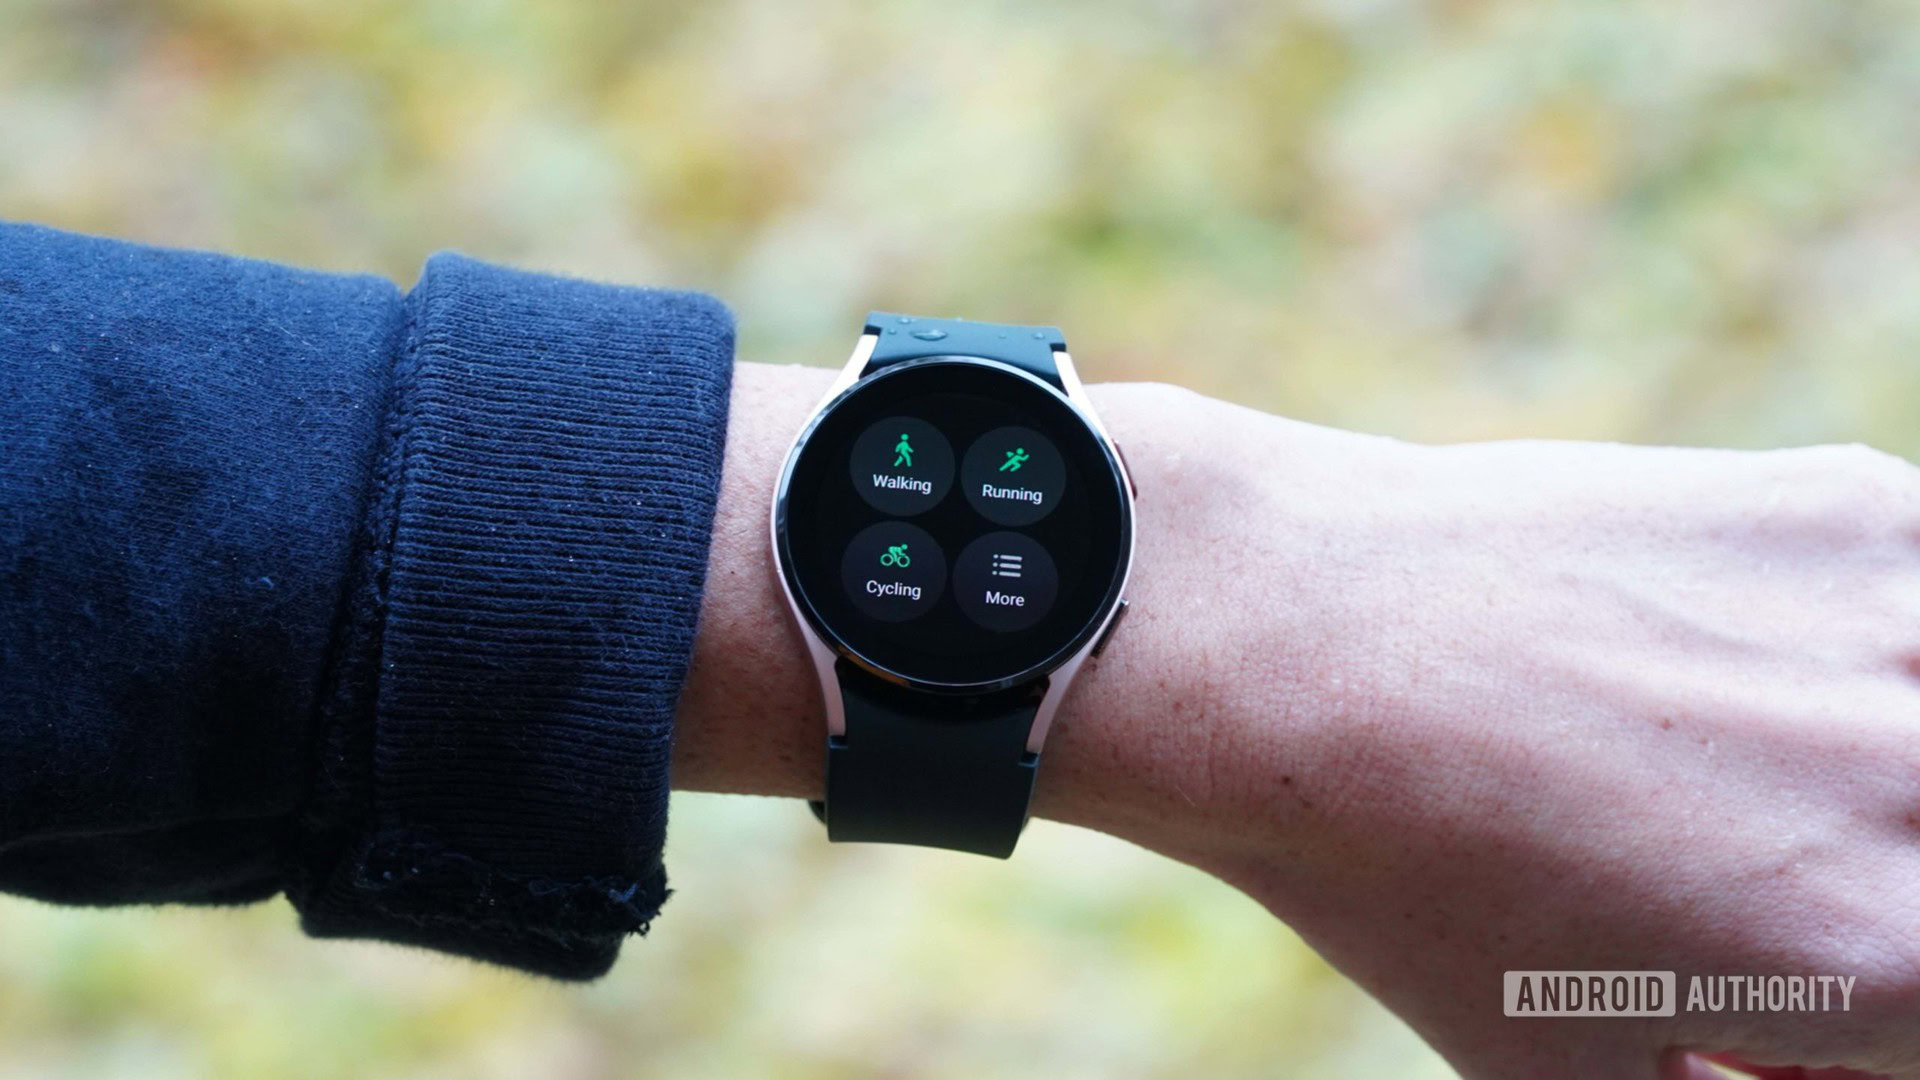 A Samsung Galaxy Watch 4 on a woman's wrist displays workout options in the Samsung Health app.